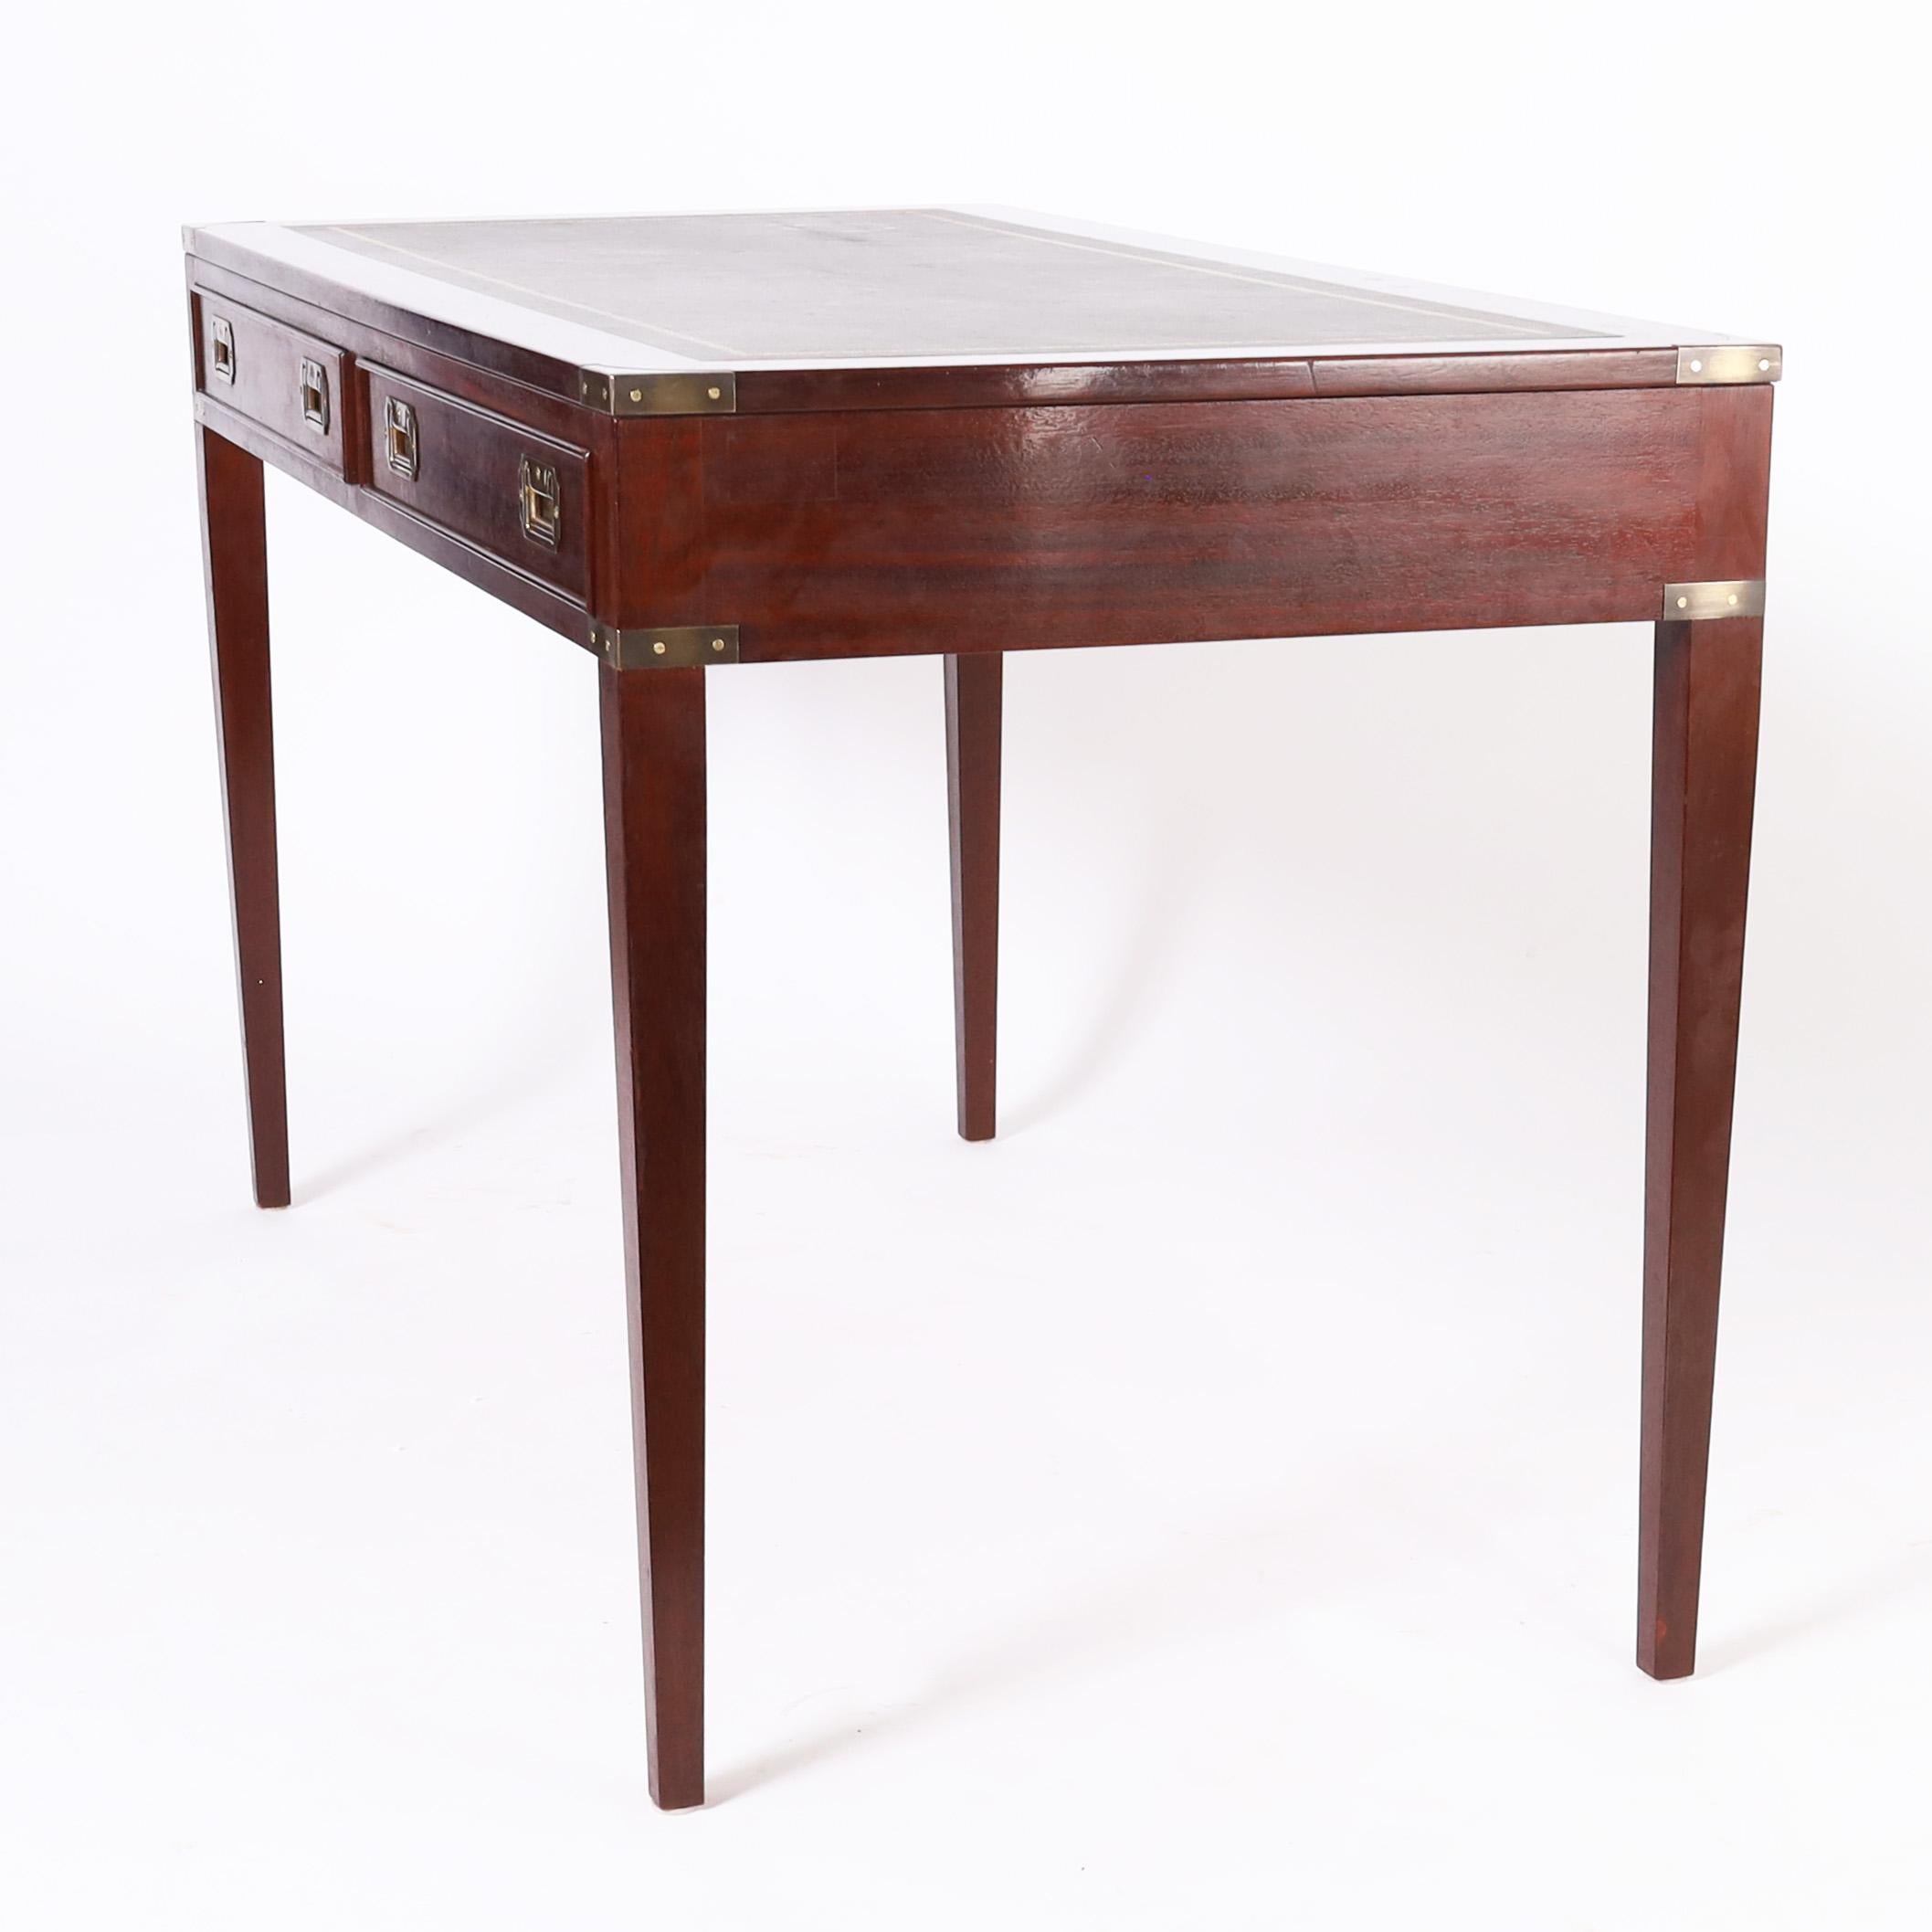 English Leather Top Campaign Style Desk In Good Condition For Sale In Palm Beach, FL